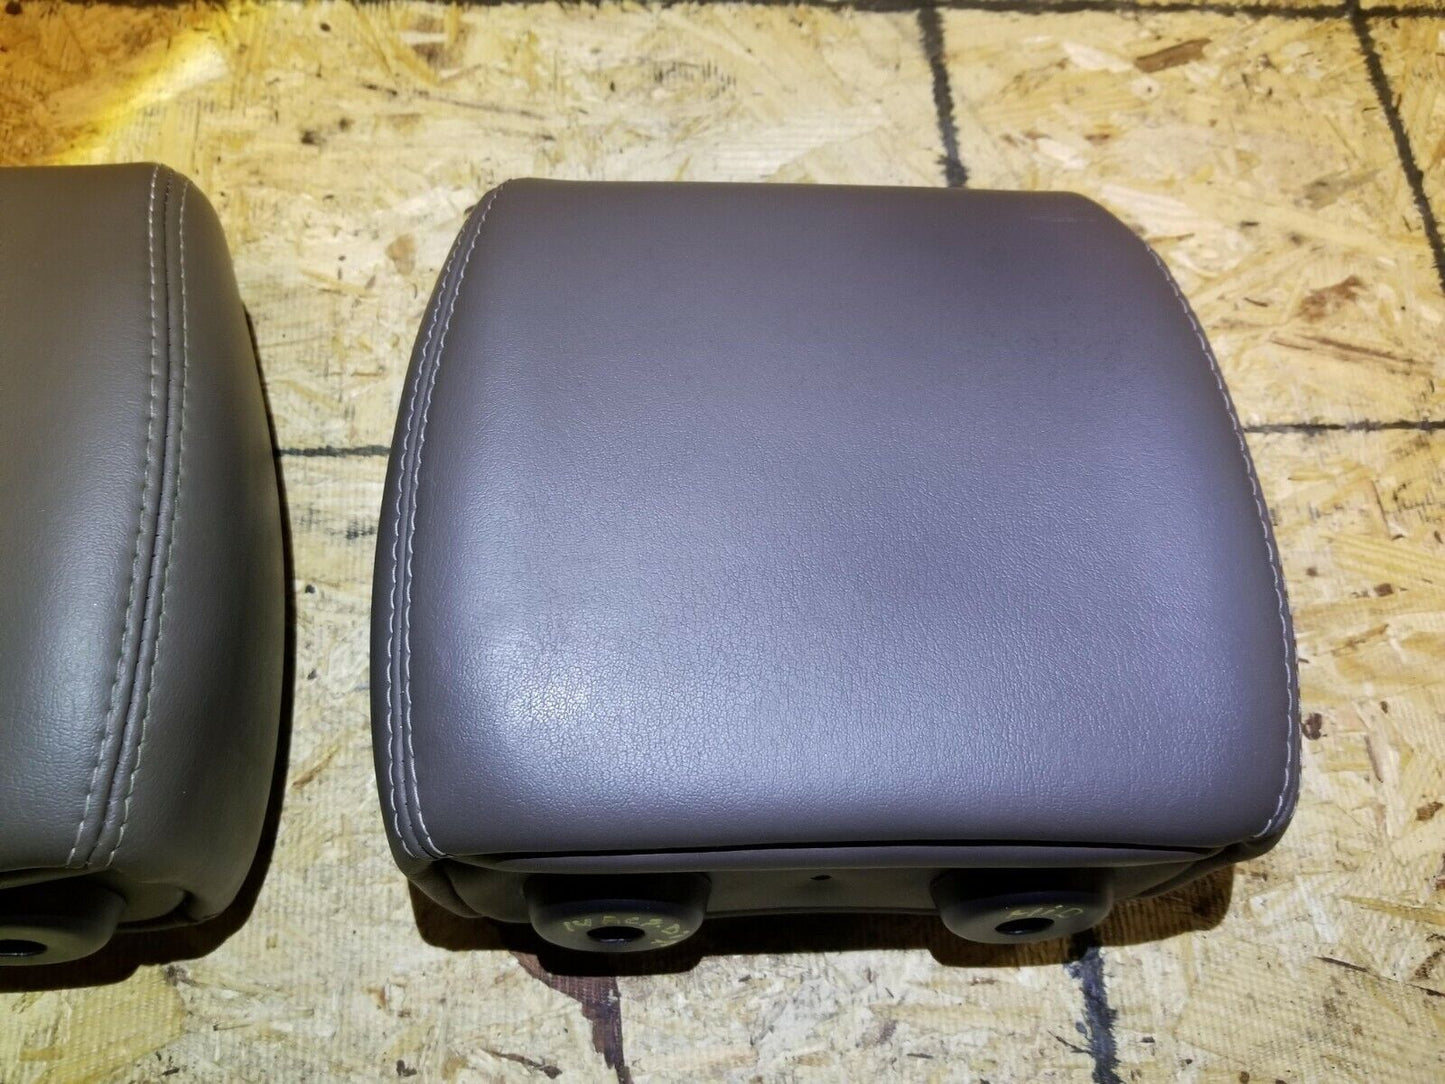 13 14 15 GMC Acadia Rear Left Or Right Second 2nd Row Seat Headrest (pair) OEM